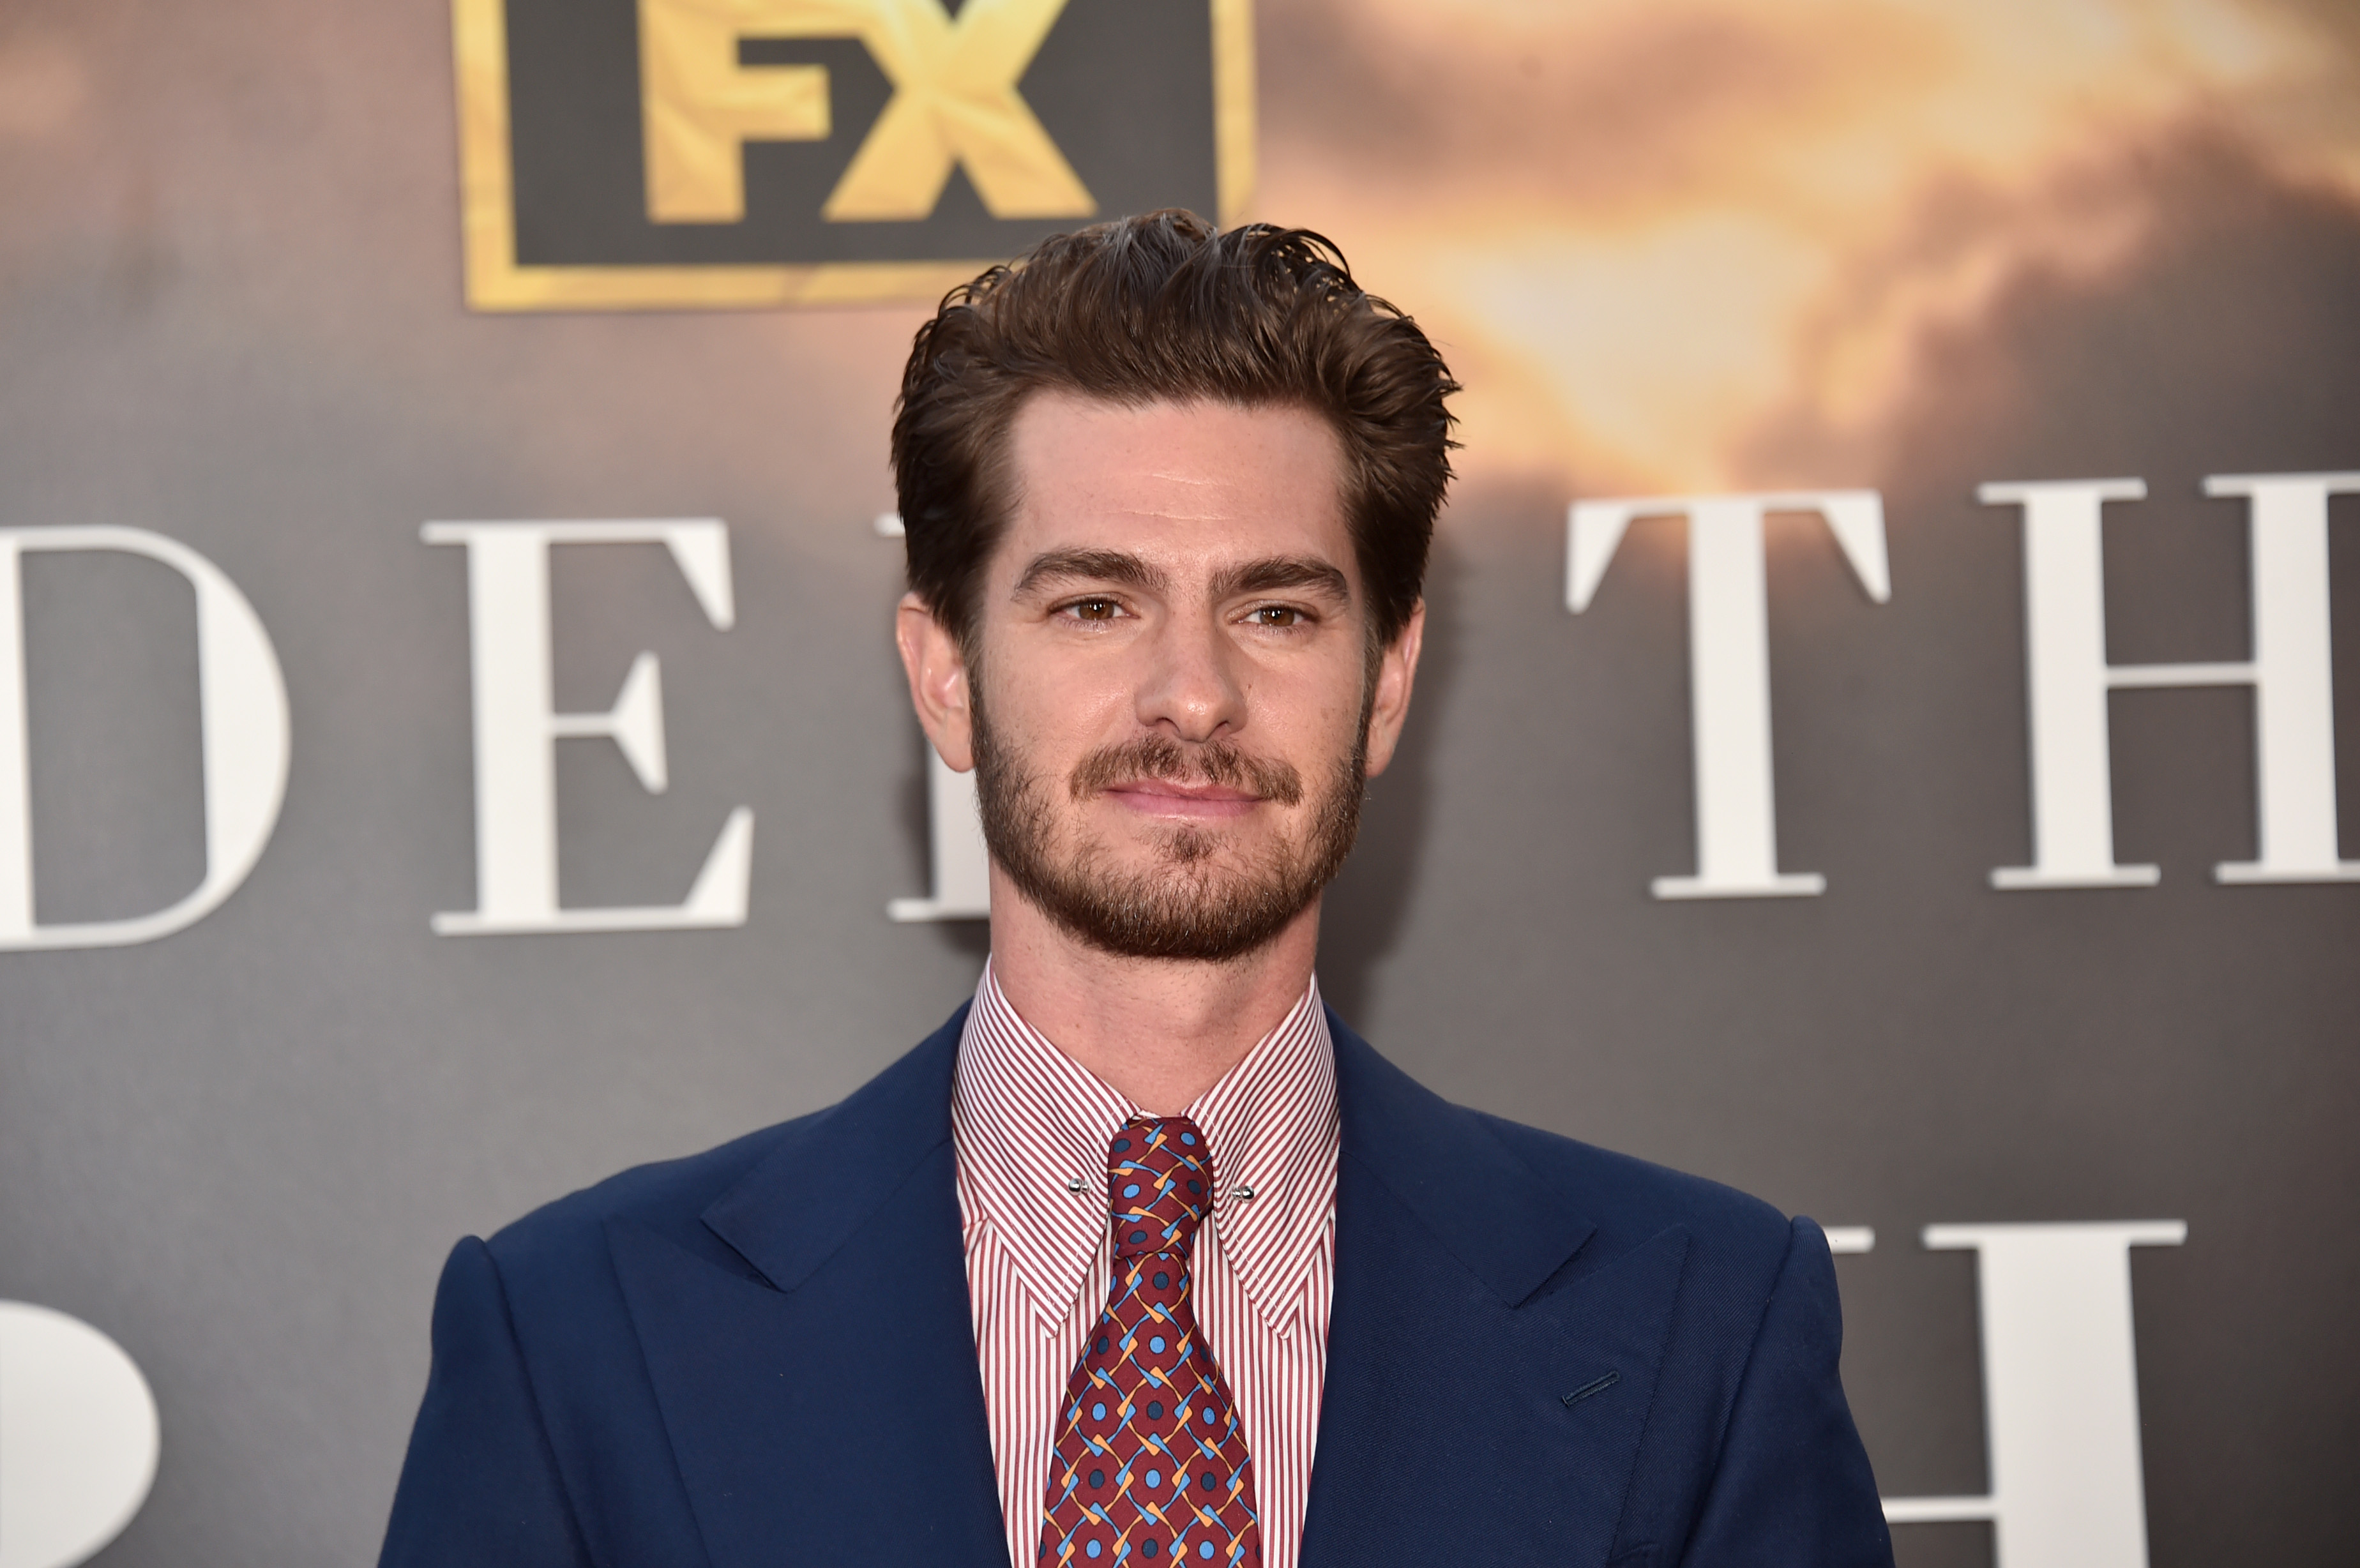 Andrew Garfield, who starred alongside Tobey Maguire in 'Spider-Man: No Way Home,' wears a dark blue suit over a light pink striped button-up shirt and dark red patterned tie.